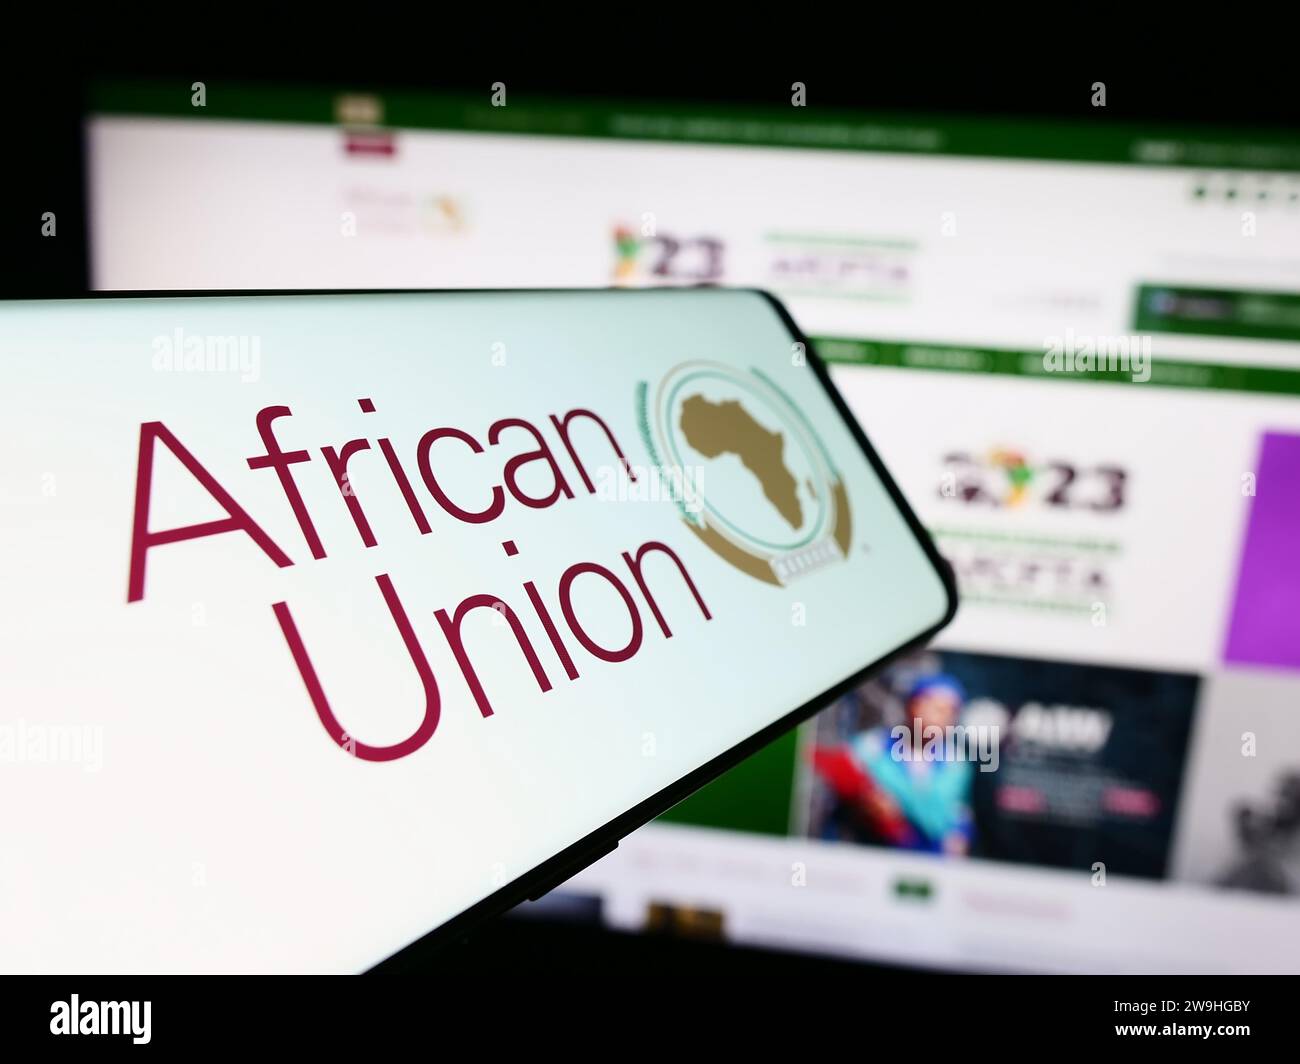 Cellphone with logo of continental organization African Union (AU) in front of website. Focus on center-left of phone display. Stock Photo